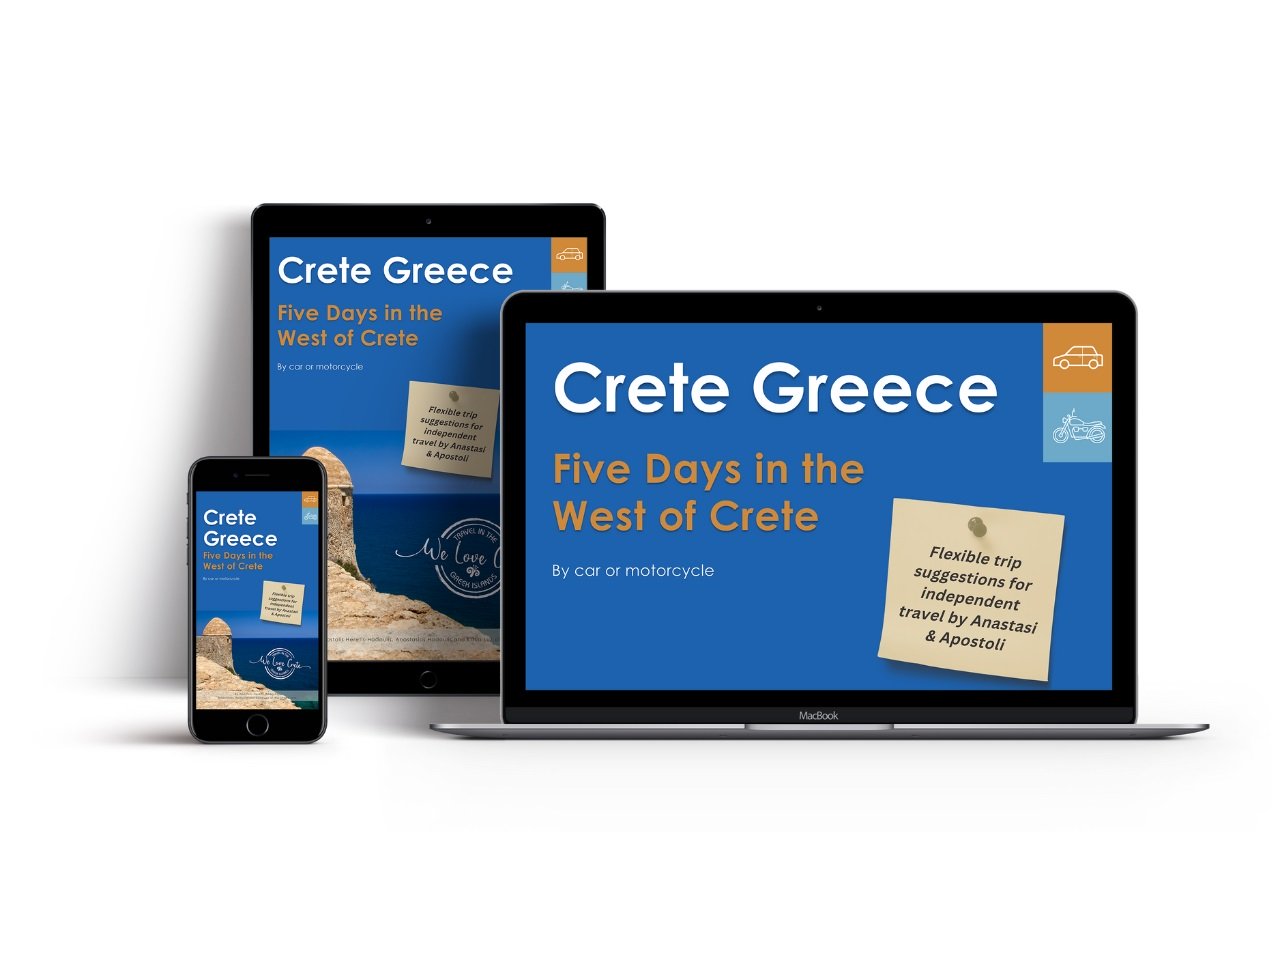 Mini Guide ebook - Five Days in the West of Crete by Car or Motorcycle